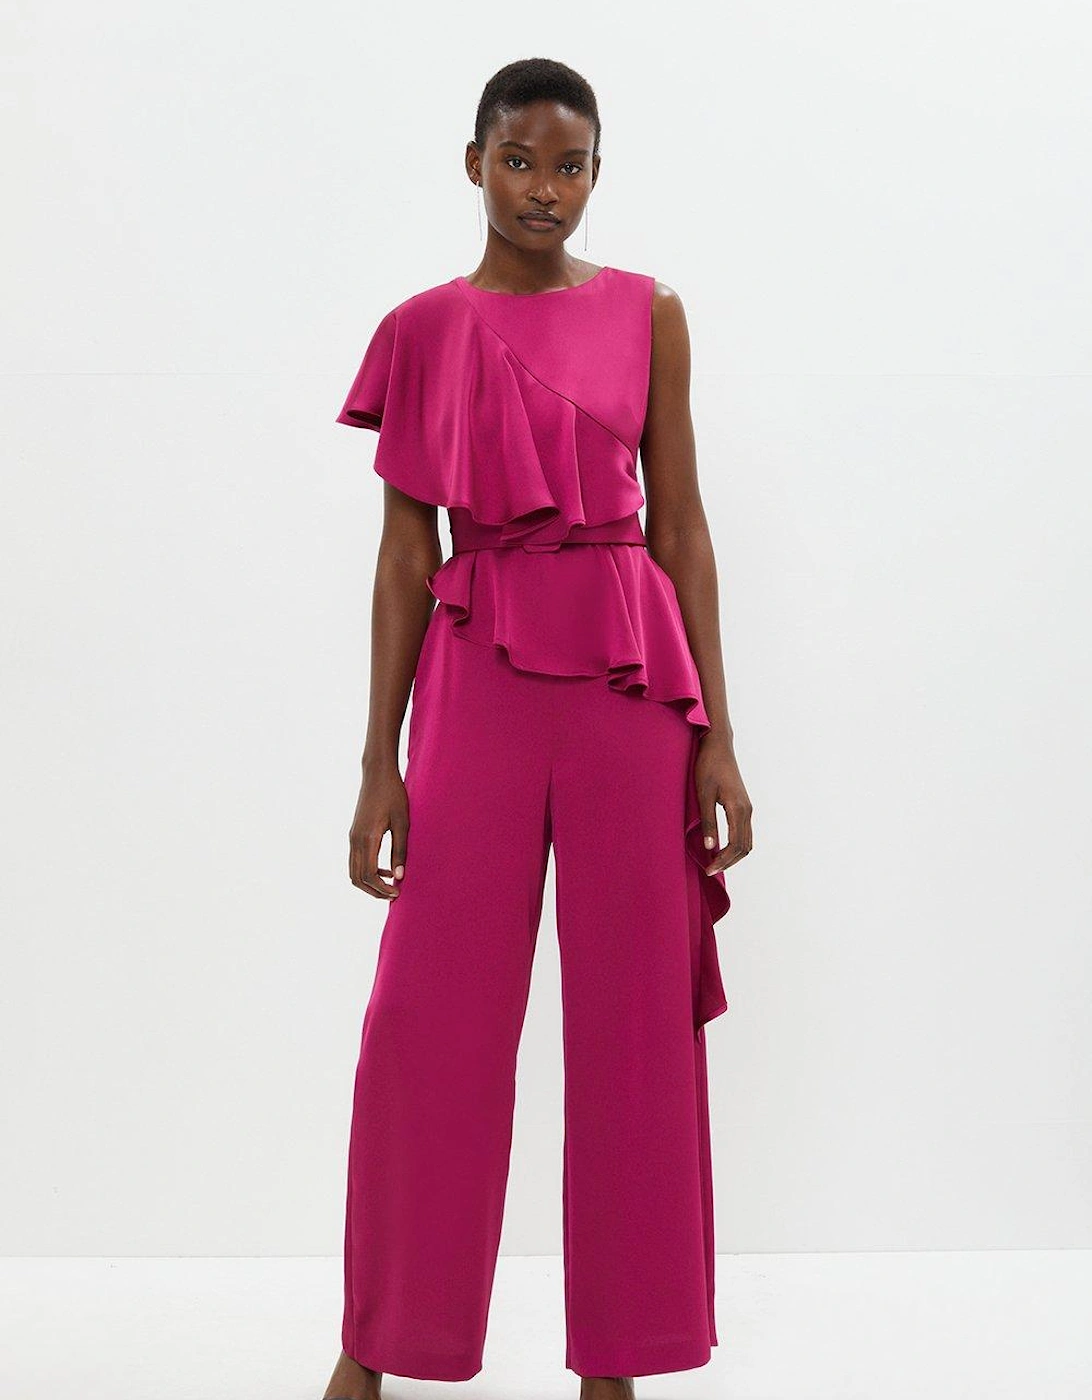 Frill Detail Belted Satin Jumpsuit